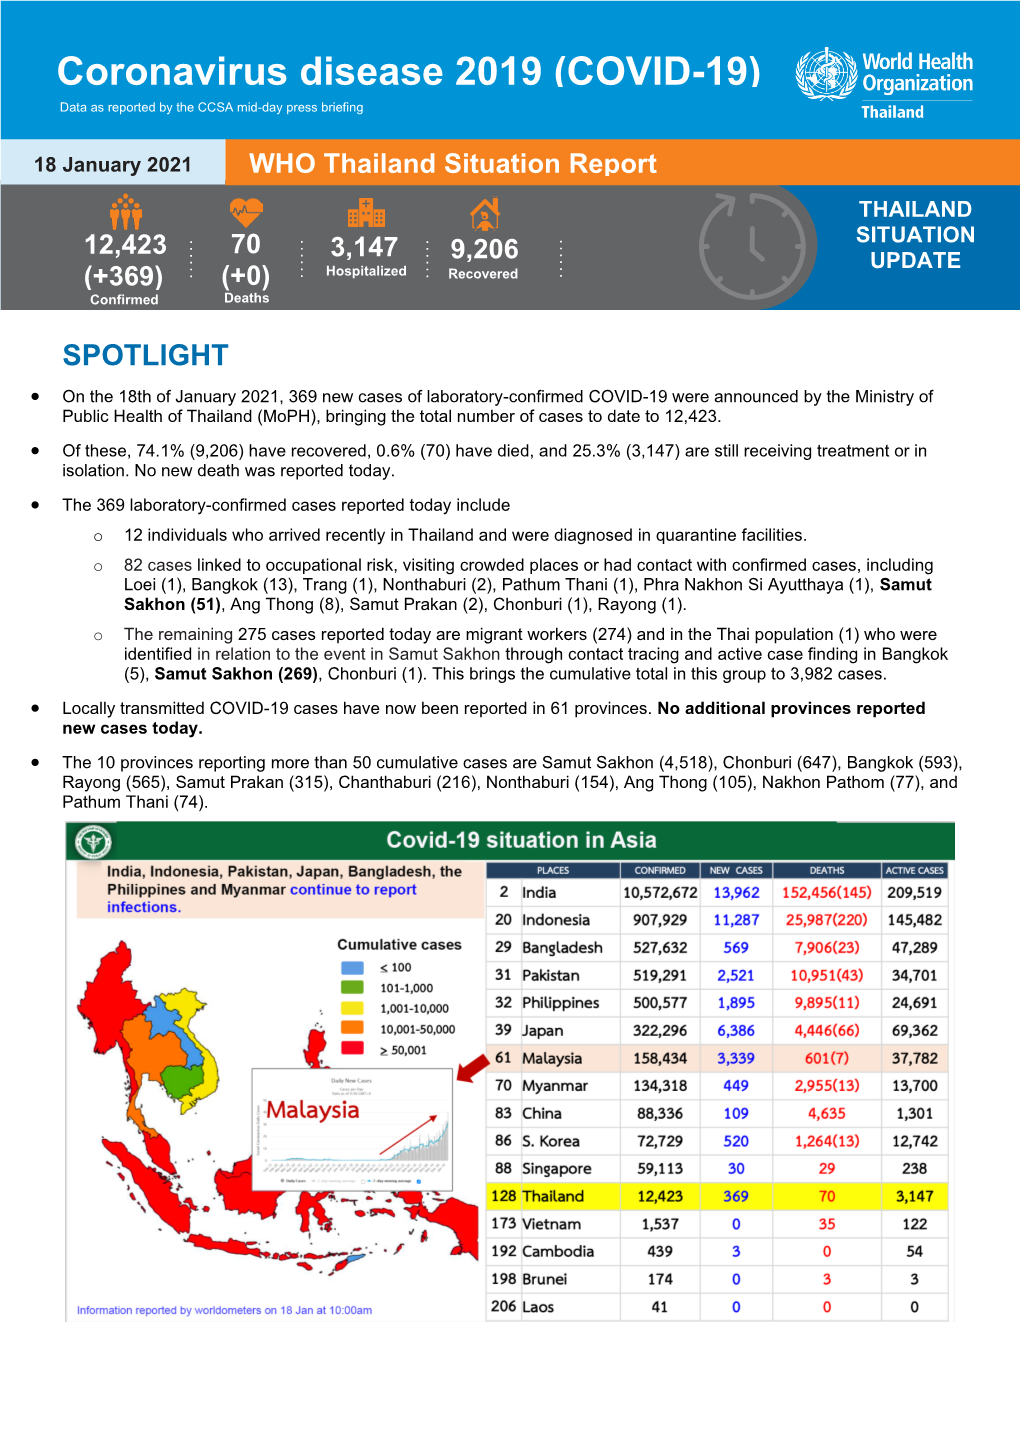 WHO Thailand Situation Report